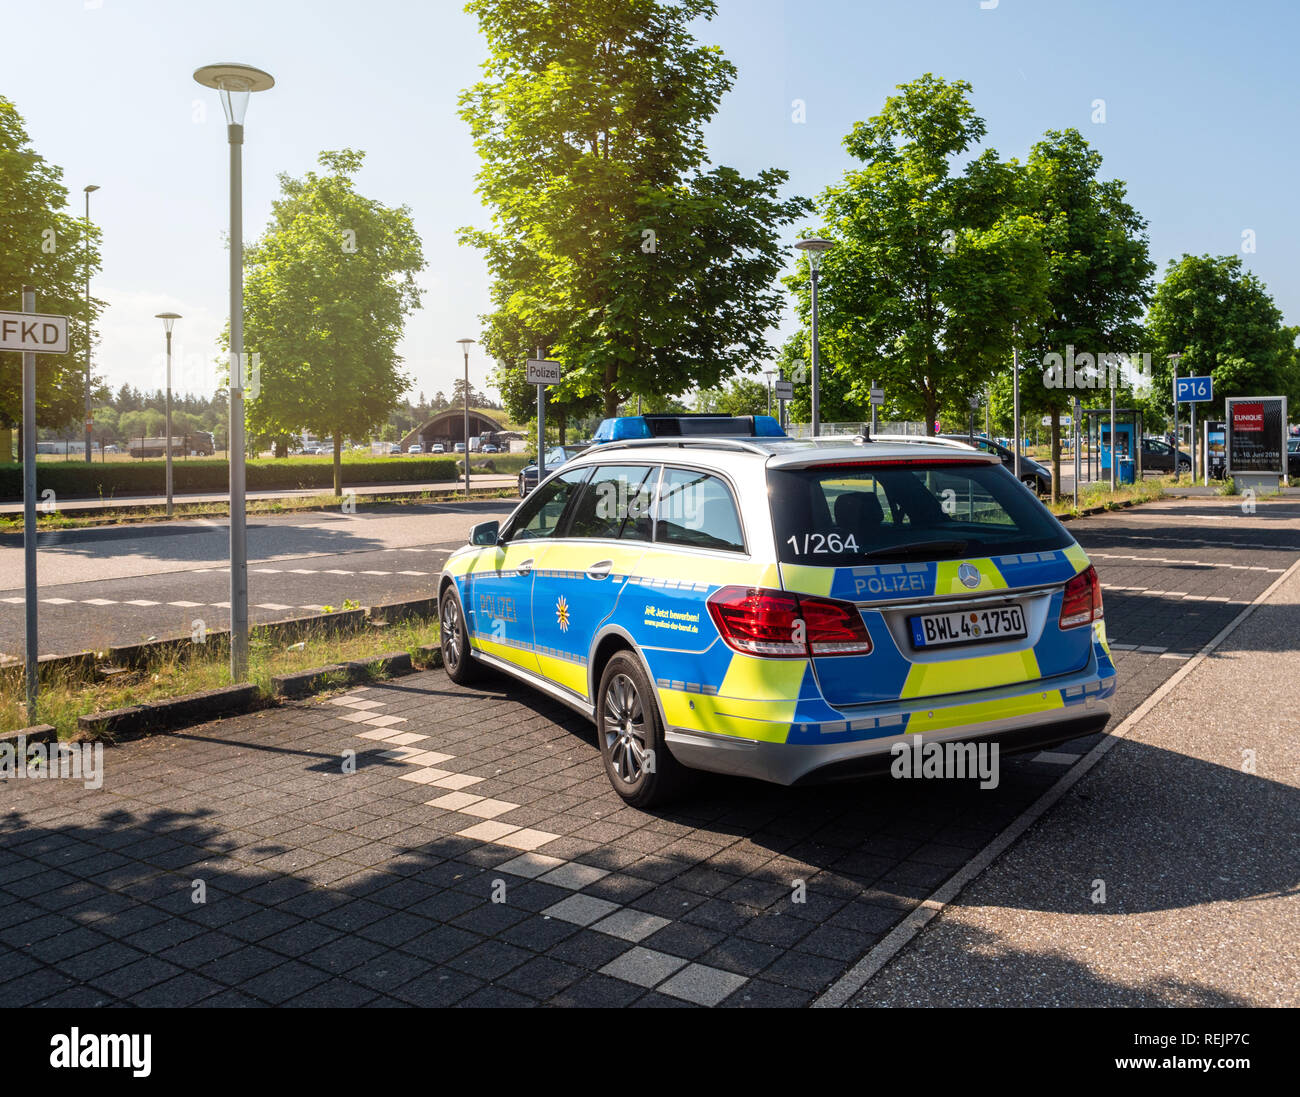 BADEN, GERMANY - MAY 11, 2018: Rear view of Polizei Police car Mercedes-Benz blue car parked in front of Karlsruhe Baden-Baden Airport (IATA: FKB, ICAO: EDSB) Stock Photo